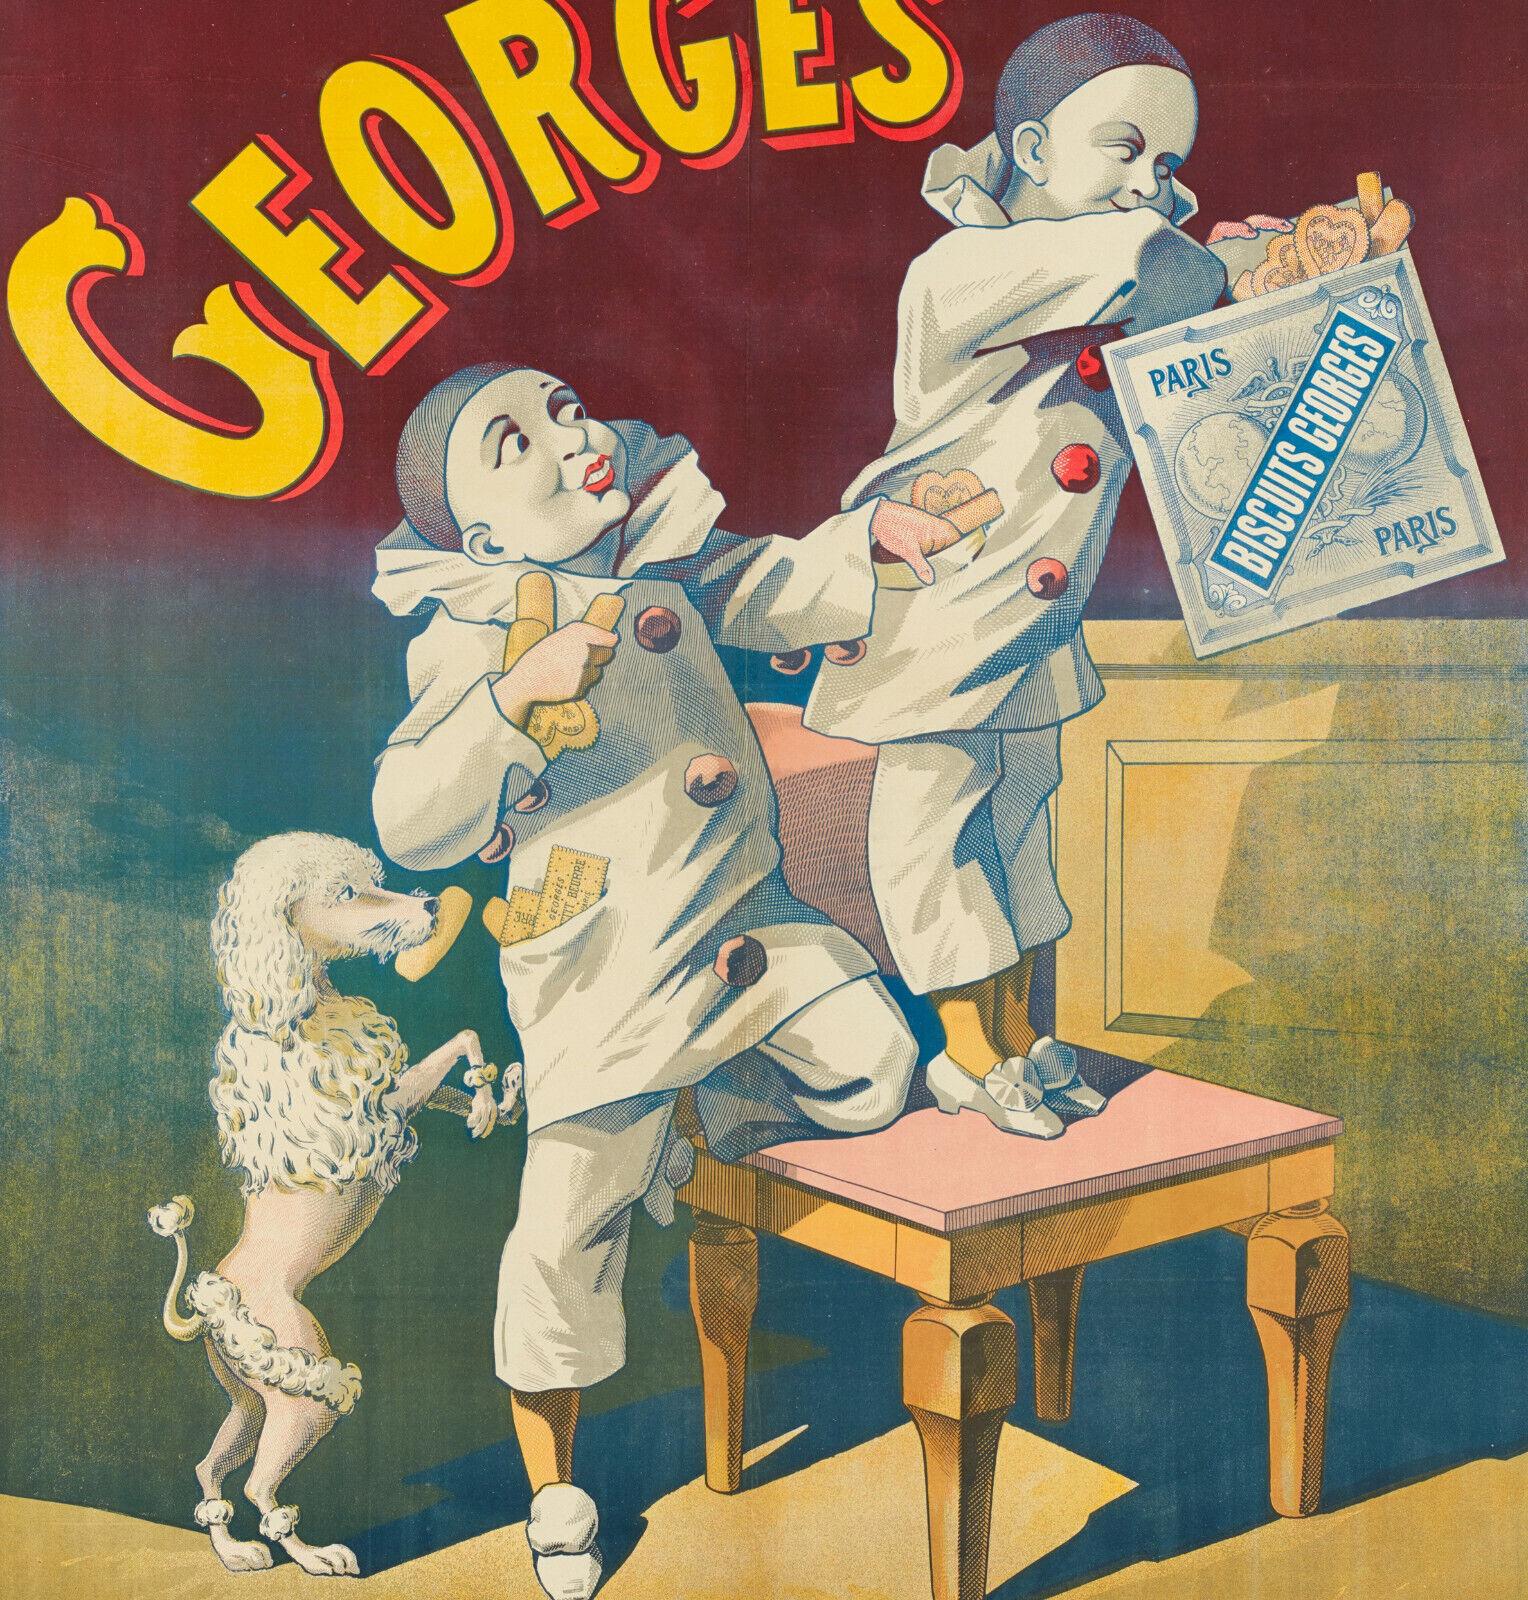 Original Vintage Poster-Biscuit Georges-Caniche-Pierrot-Paris-Chien, 1900

On the poster, a poodle steals cookies from the pocket of a Pierrot, who himself steals them from another Pierrot.

Additional Details:
Materials and Techniques: Colour